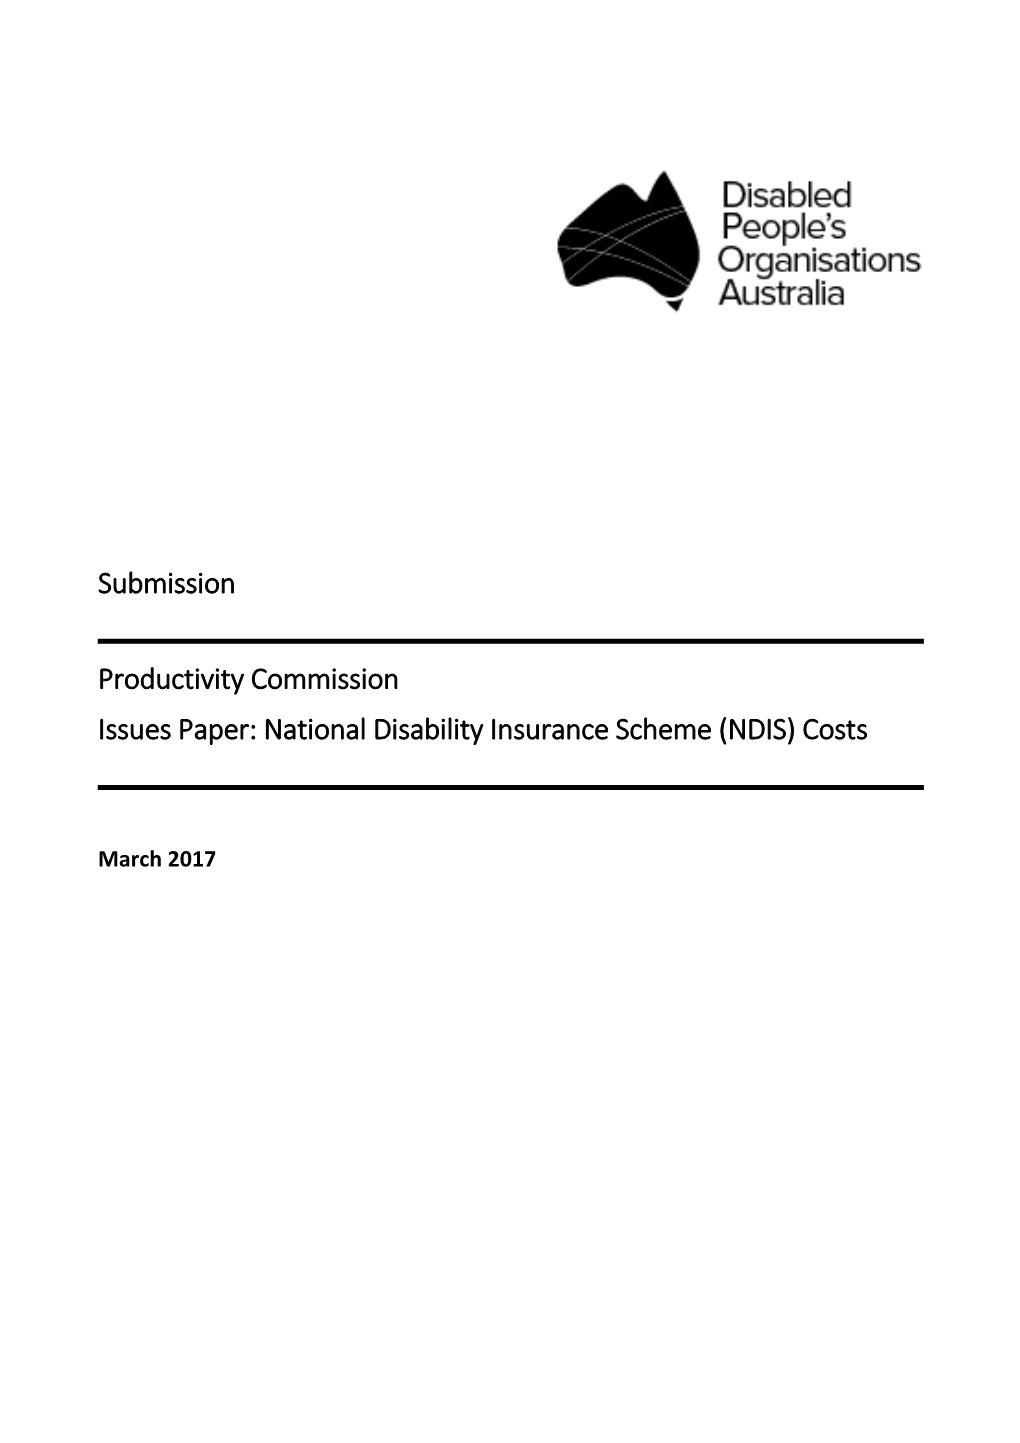 Issues Paper: National Disability Insurance Scheme (NDIS) Costs